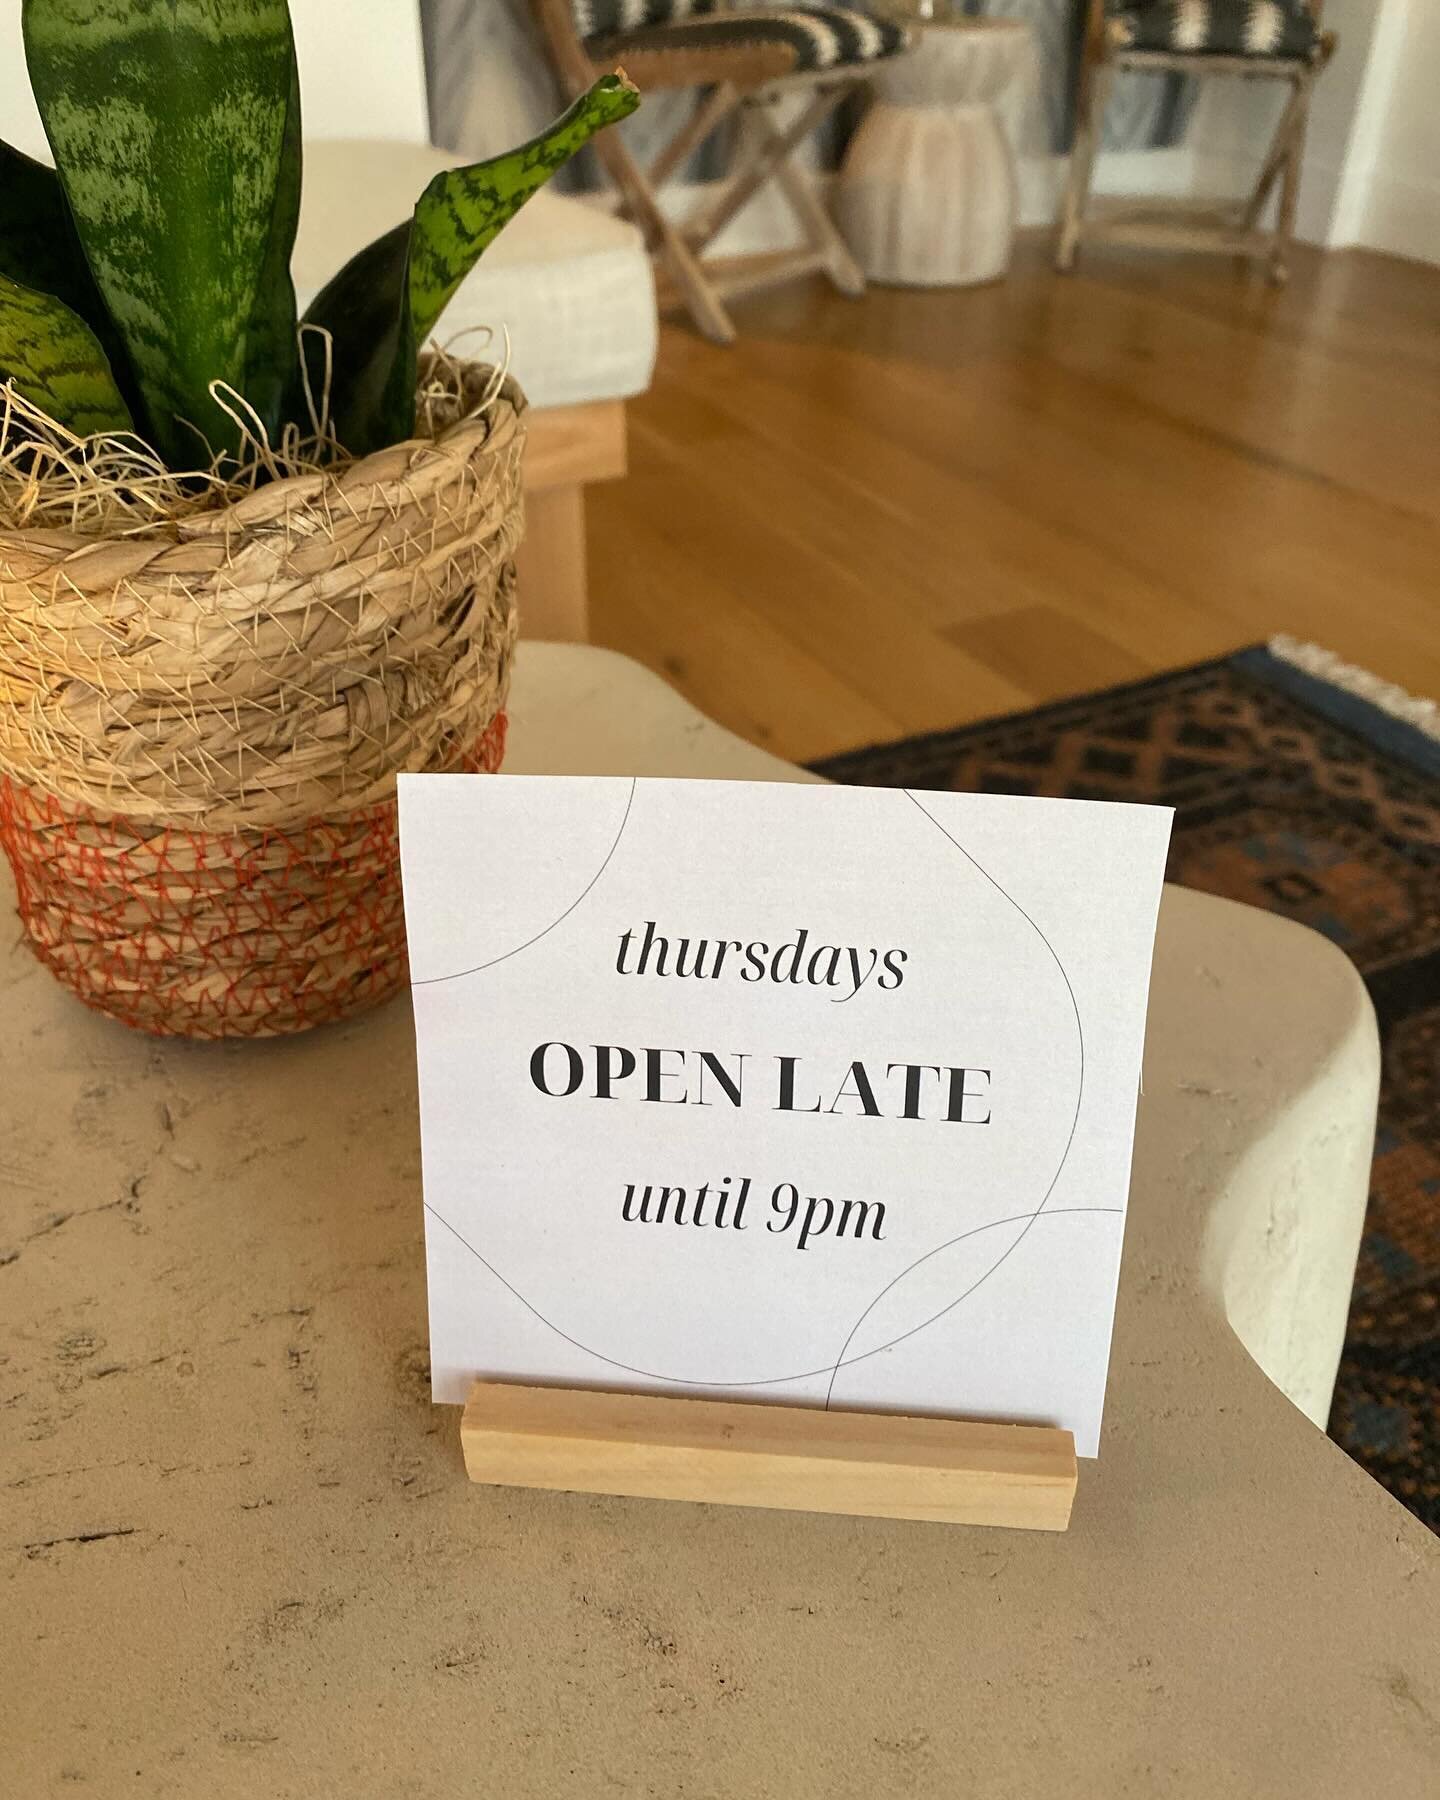 You asked, we listened&hellip;
⏰ We are now open until 9pm on Thursdays! Late night special for extra relaxing after a long work day. 
&bull;
&bull;
Book on our App + Link in bio.